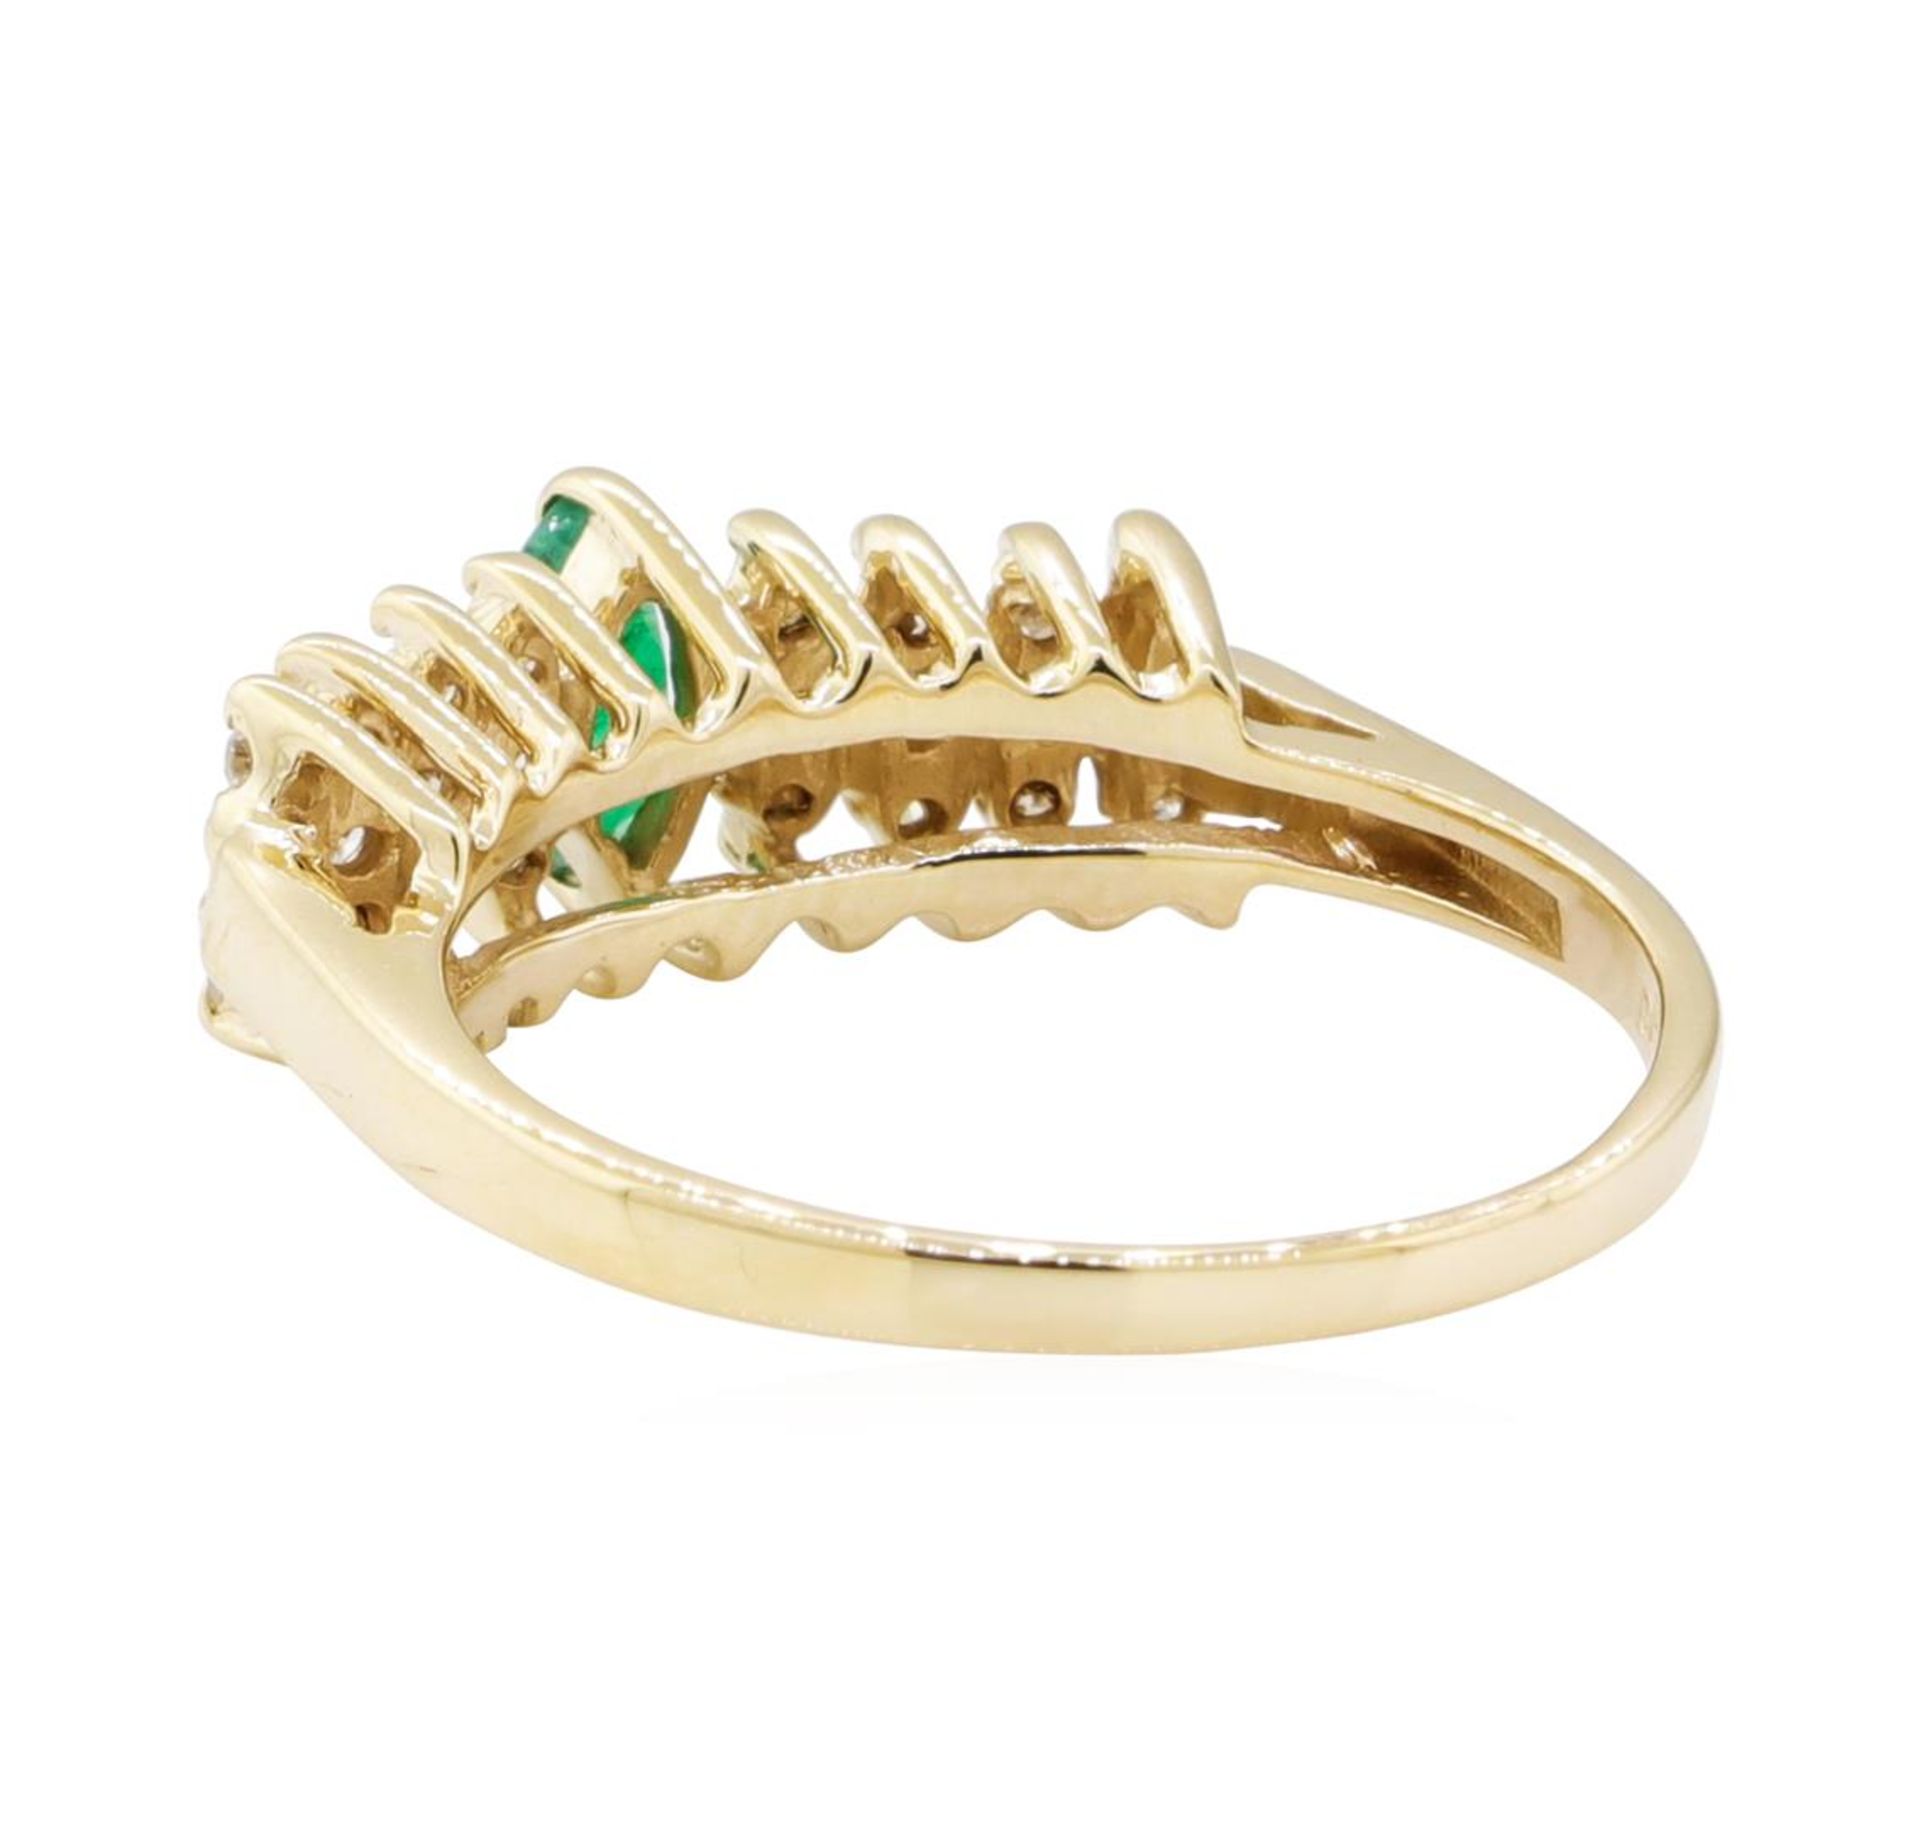 0.50 ctw Diamond and Emerald Ring - 14KT Yellow Gold - Image 3 of 4